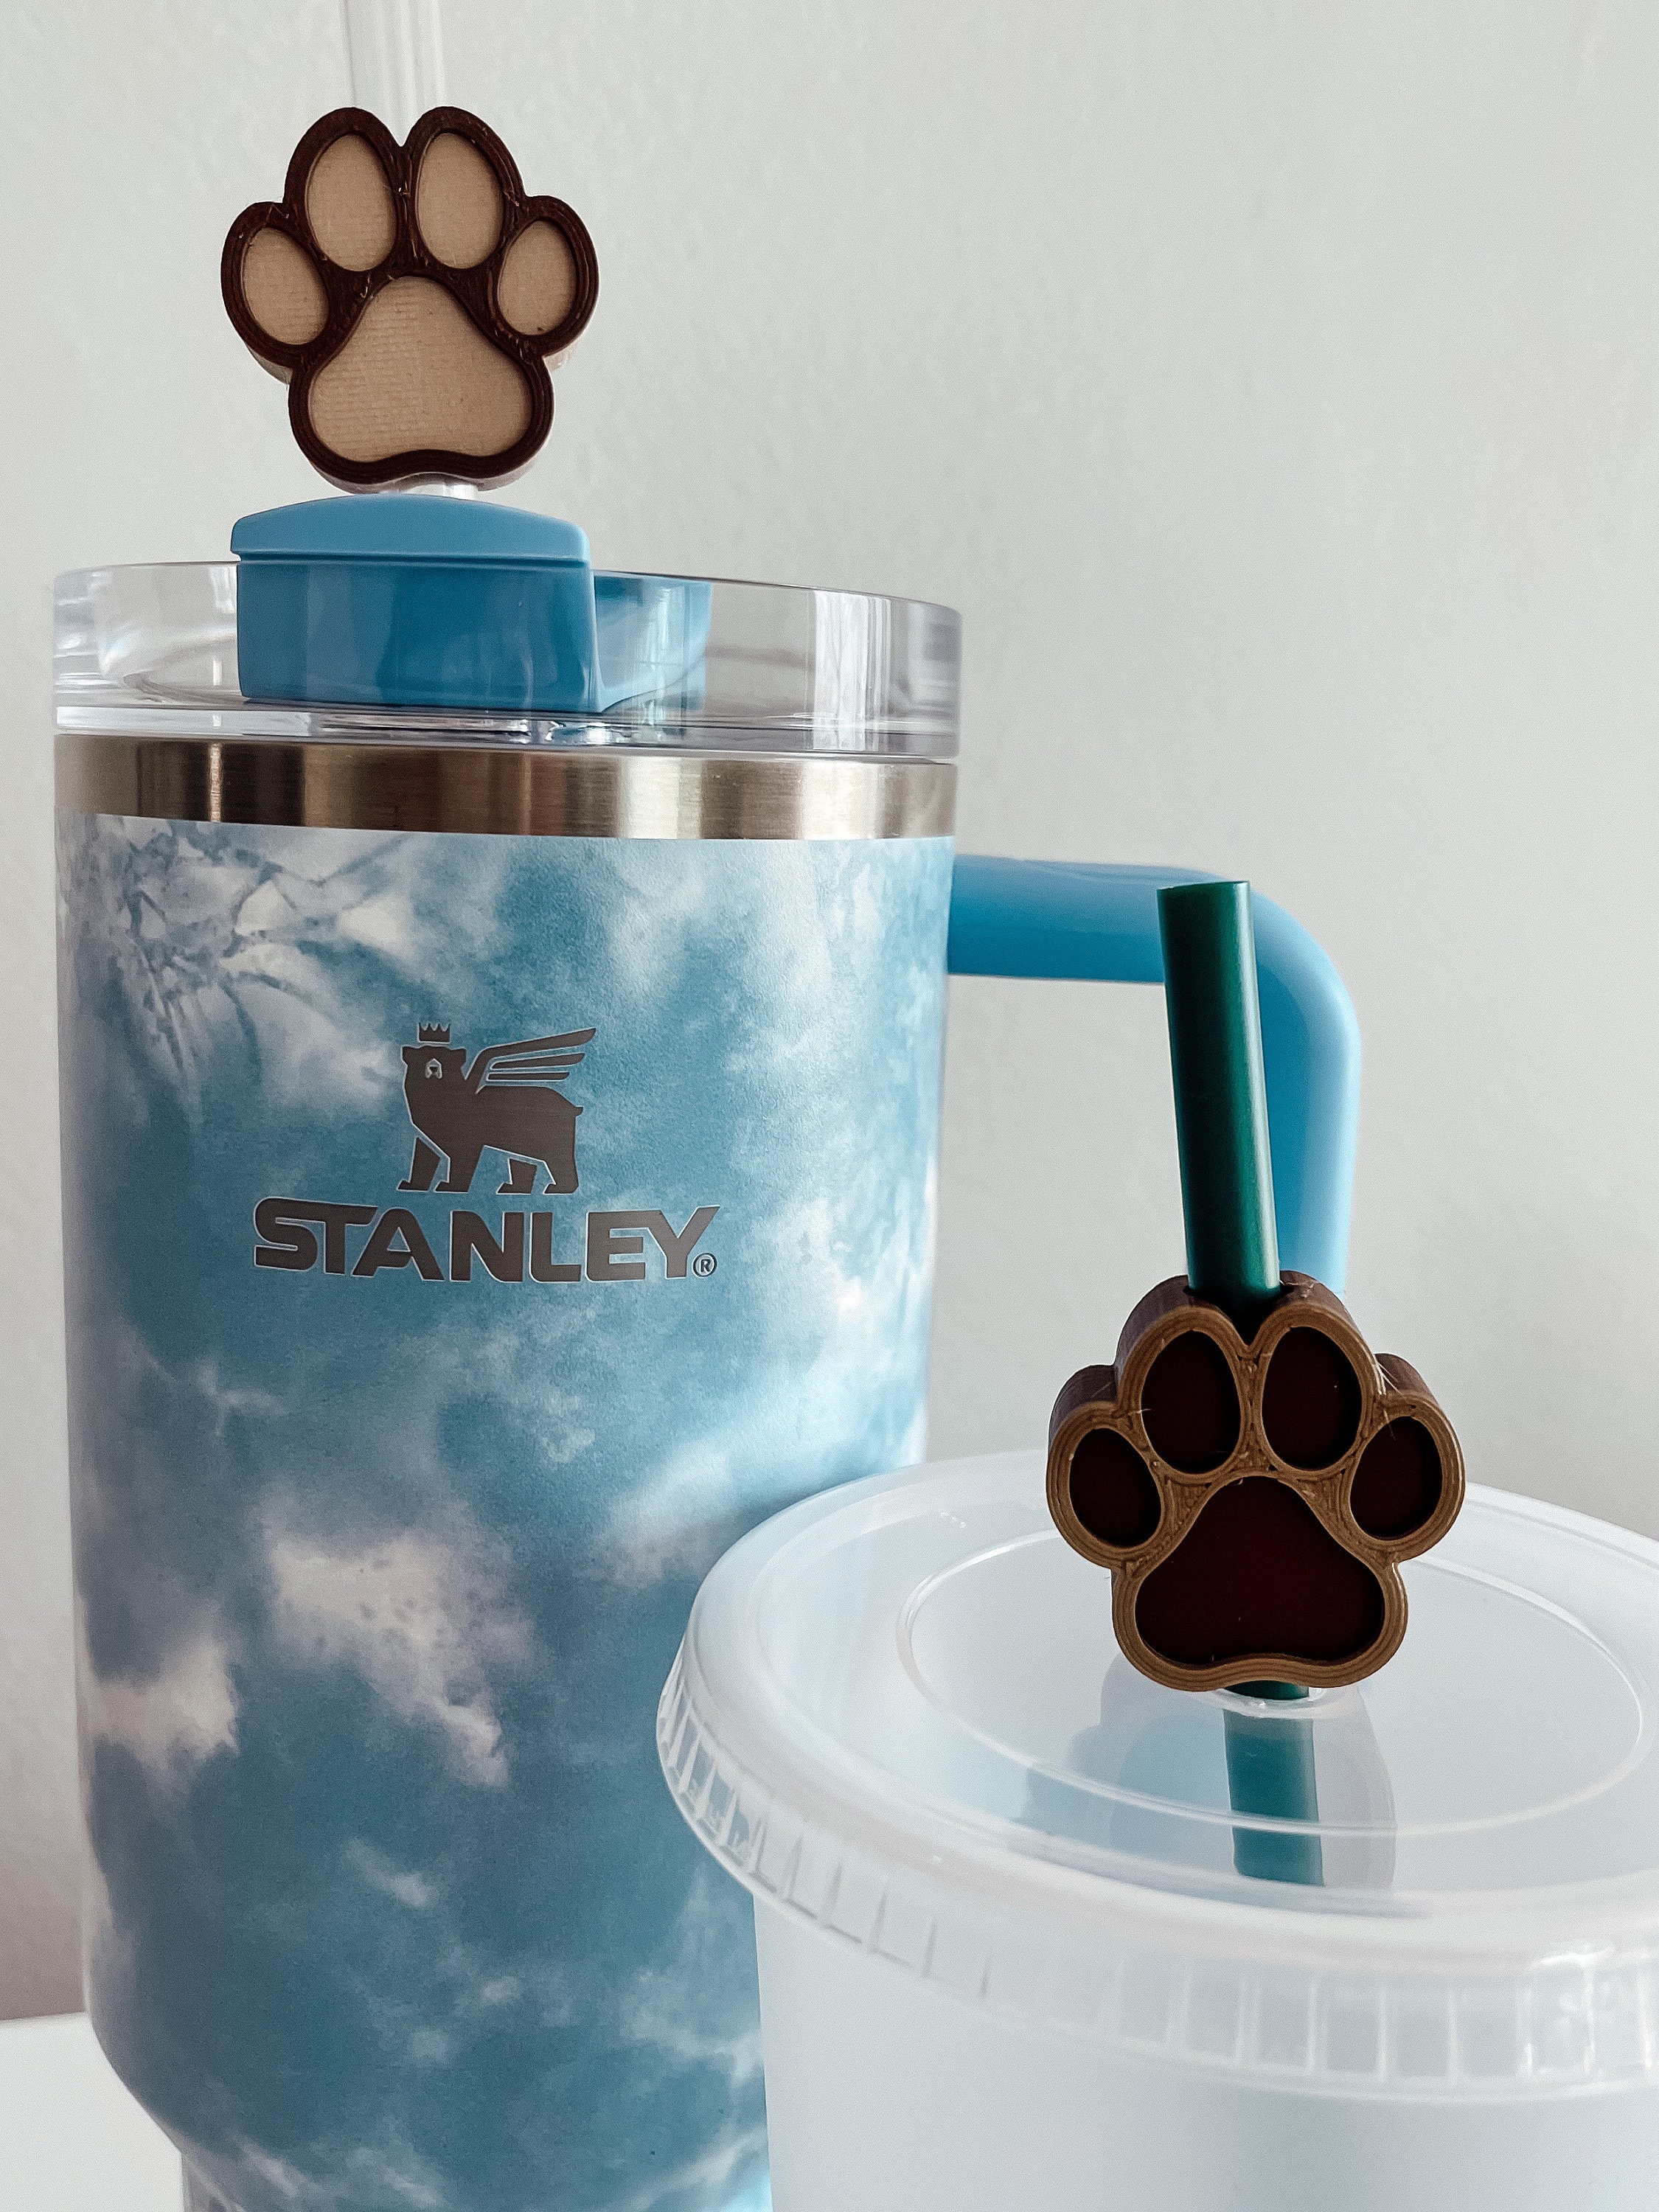 Dog Mom, Cat Mom Straw Toppers Works With Stanley Cups Pet Owner